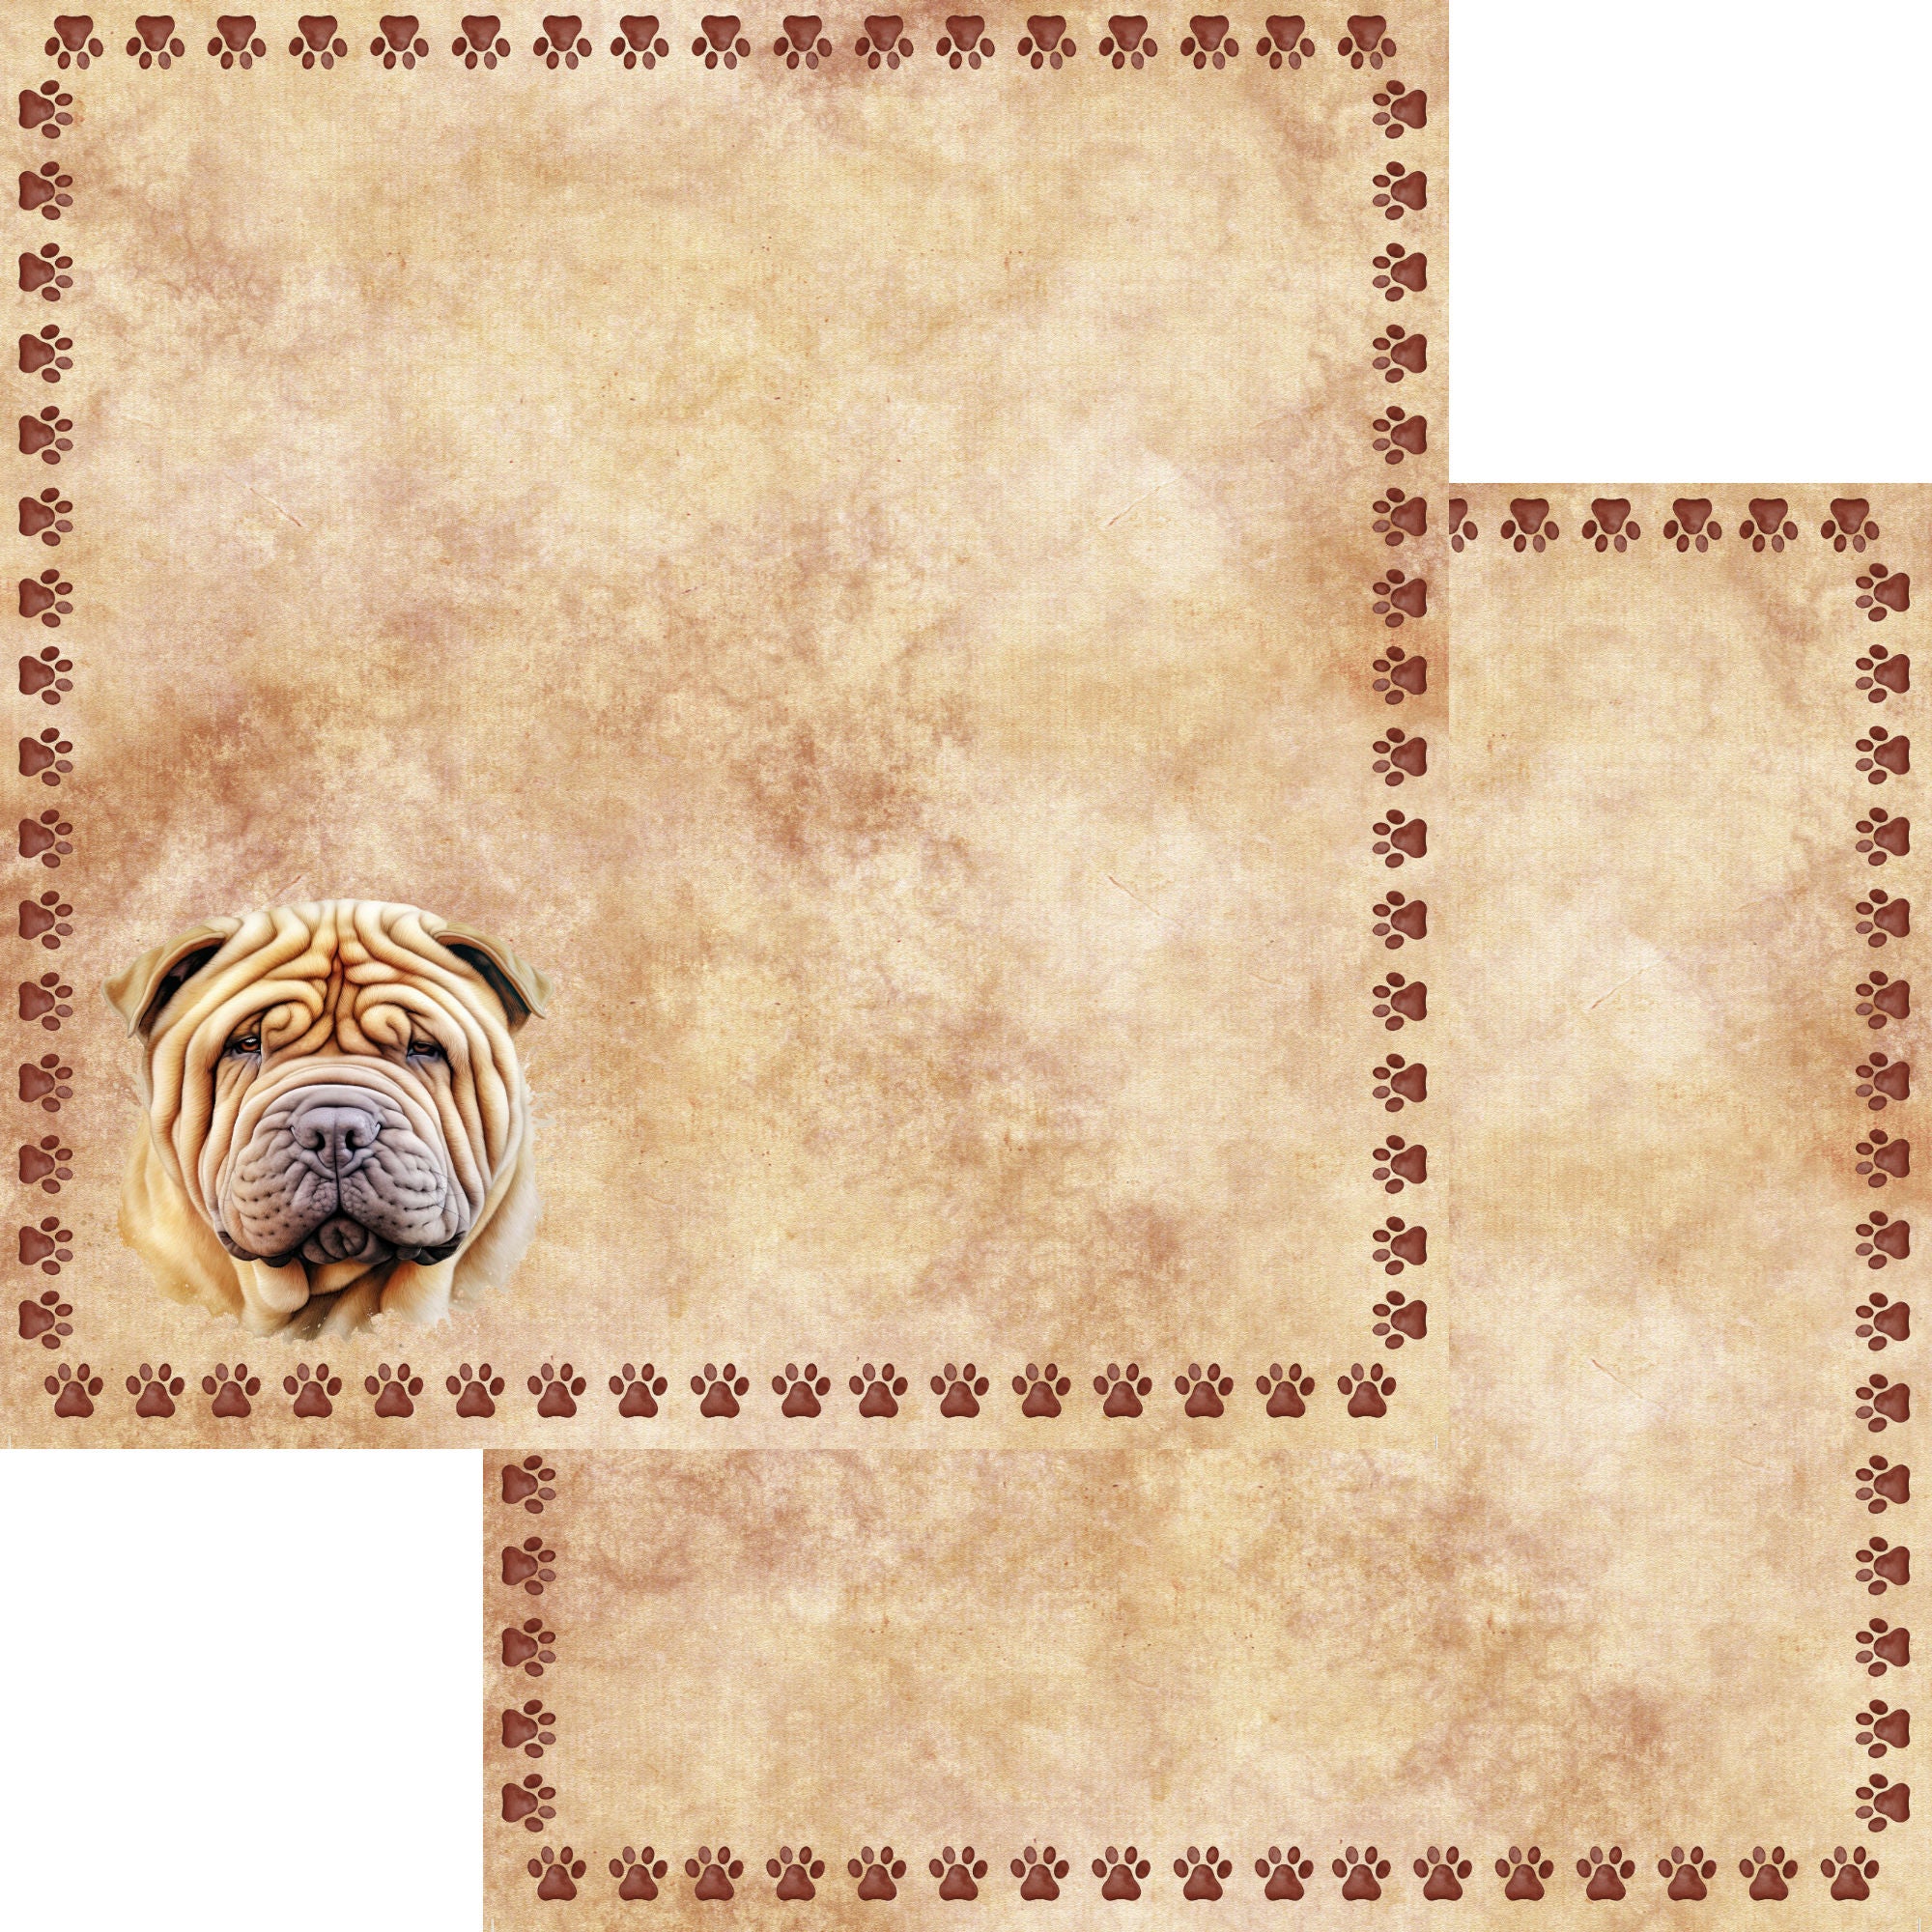 Dog Breeds Collection Shar Pei 12 x 12 Double-Sided Scrapbook Paper by SSC Designs